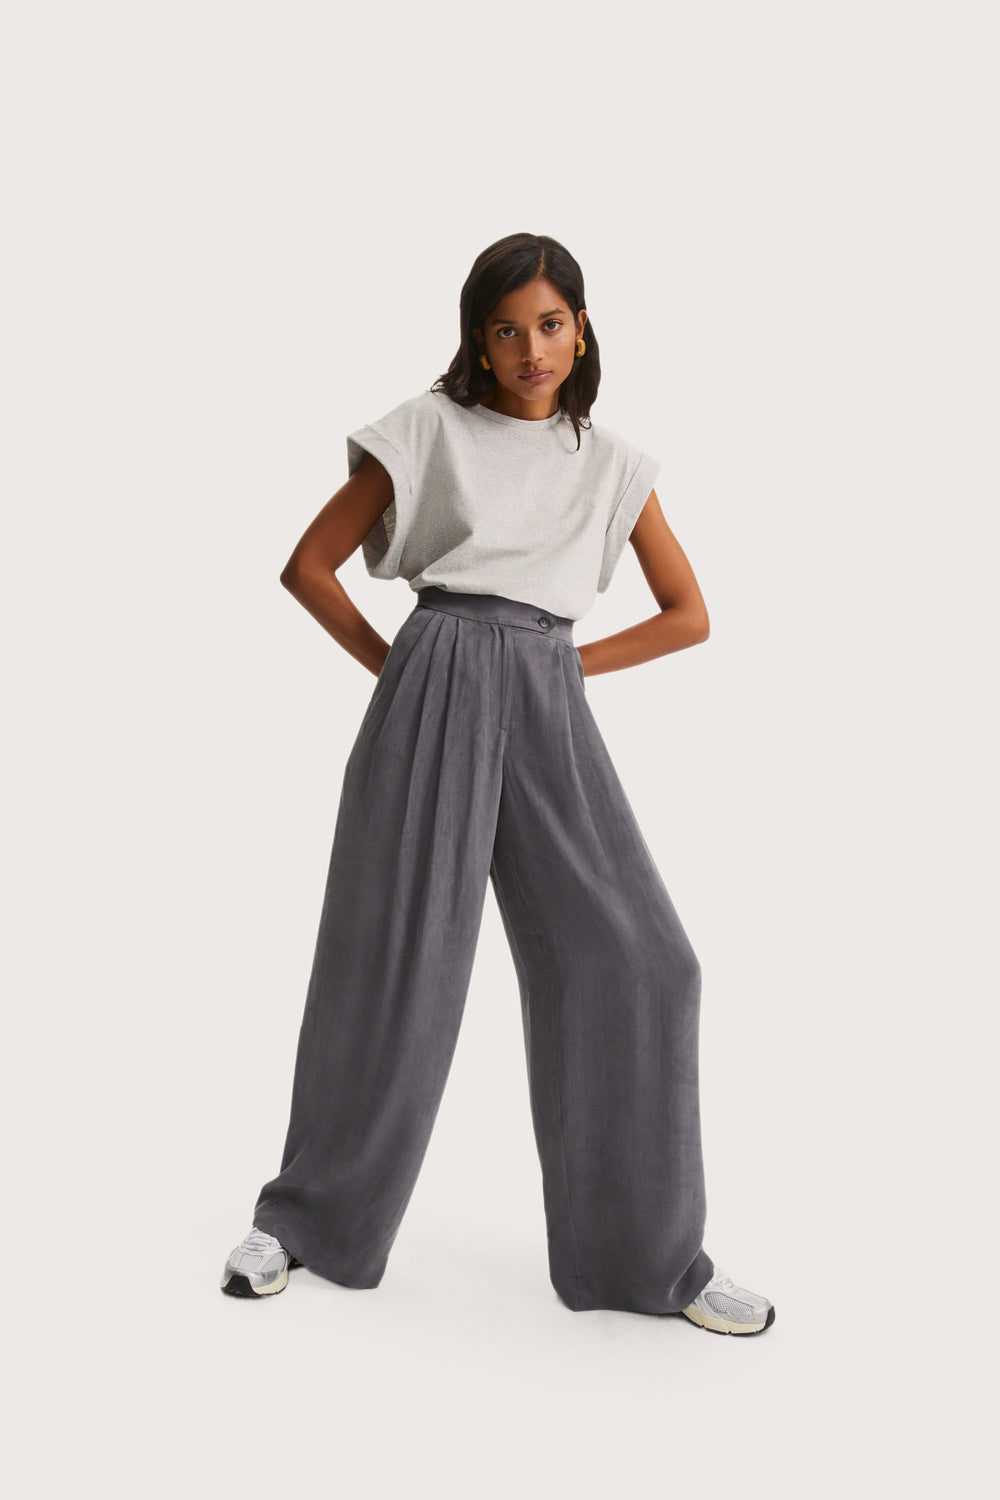 ASTAIRE PANTS
